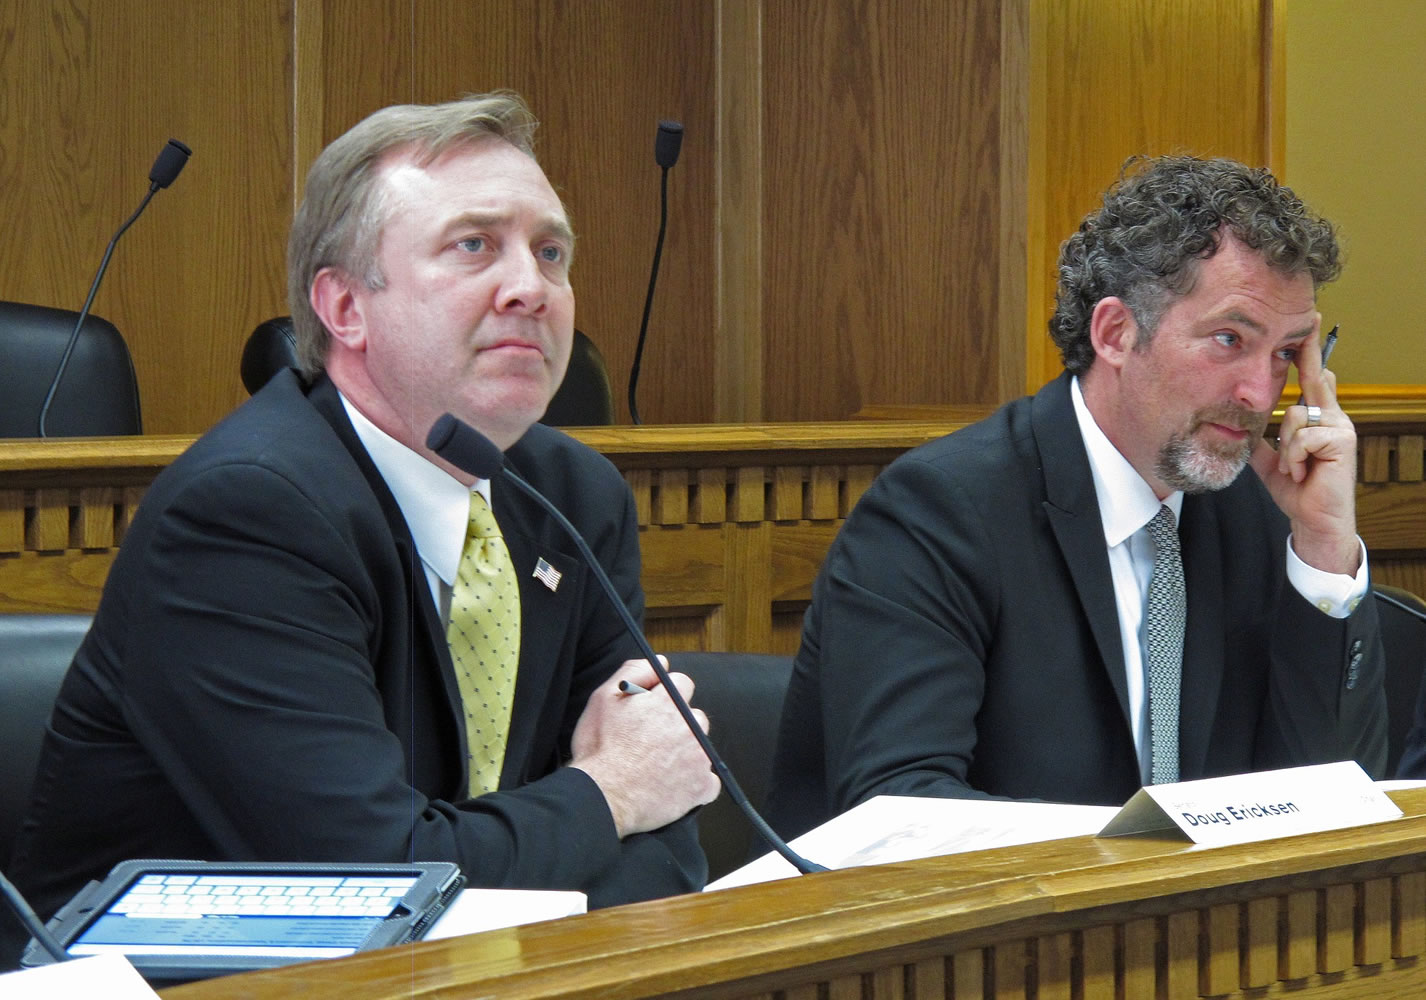 Republican state Sen. Doug Ericksen, left, and Democratic state Sen. Kevin Ranker listen to testimony March 26, 2013 from a climate change skeptic at a hearing in Olympia. Flush with cash from California billionaire Tom Steyer, a Washington state environmental group is backing candidates this November who they think can help Democratic Gov.